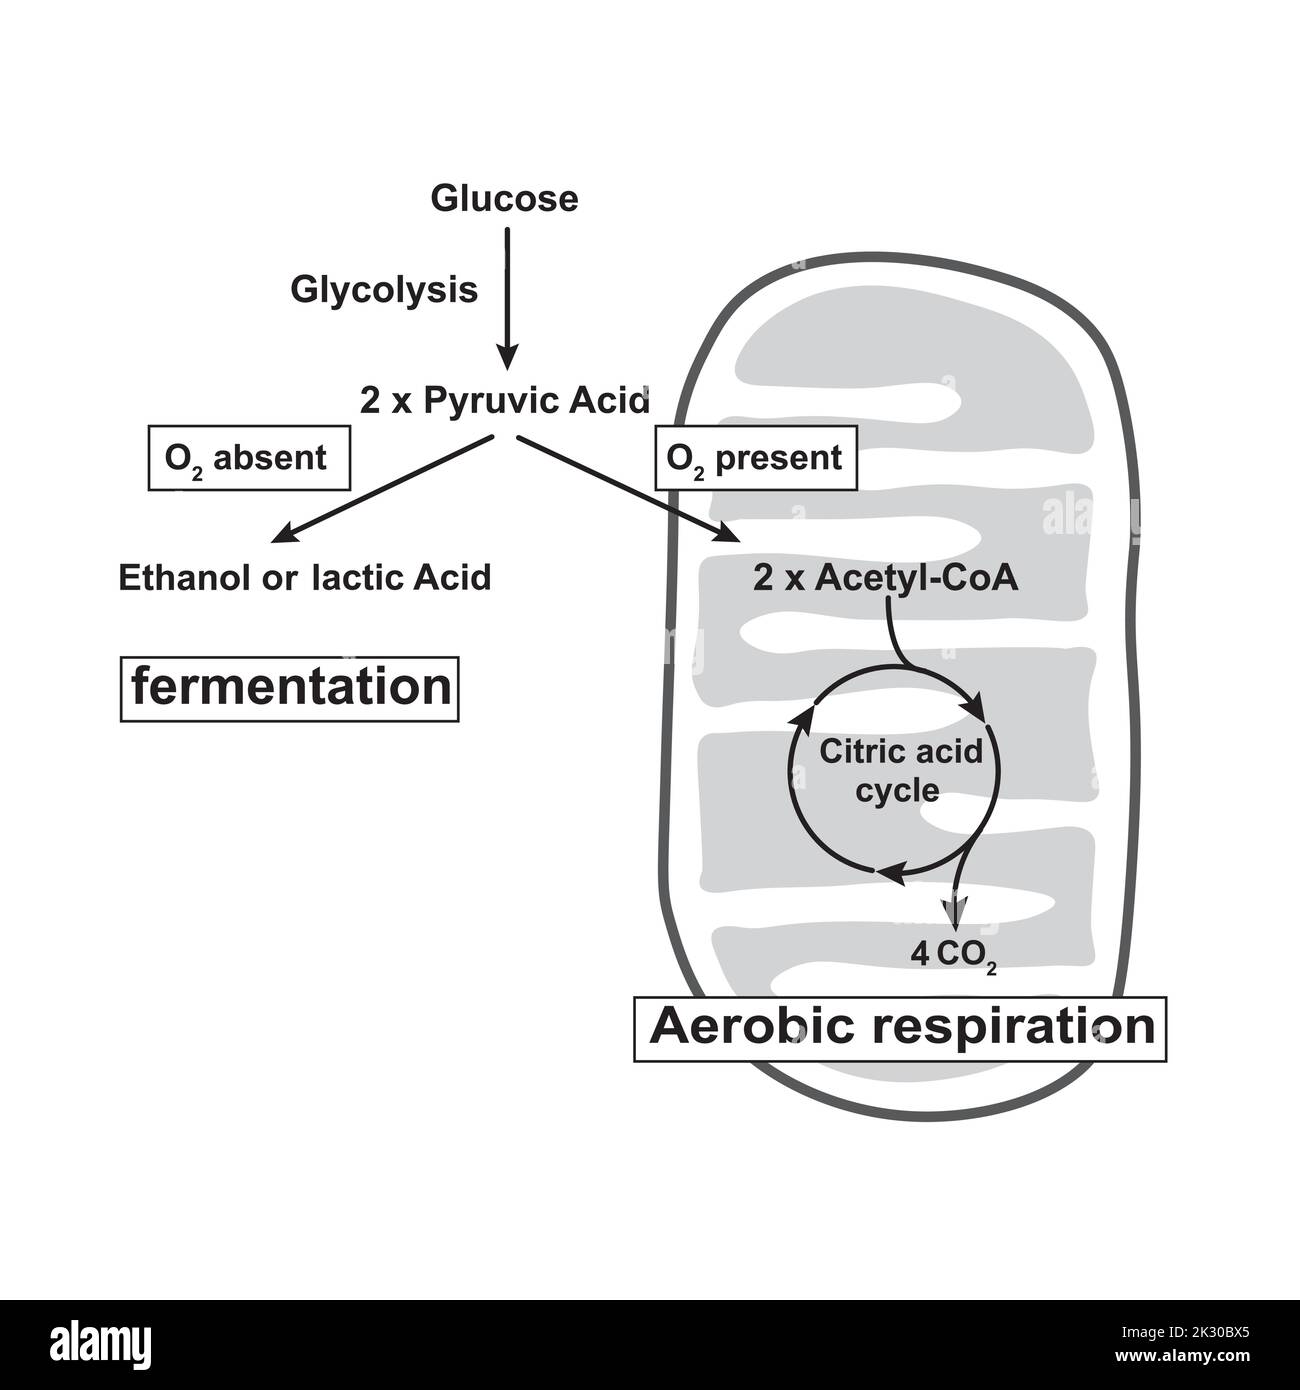 Glycolysis, Aerobic Respiration And Anaerobic Fermentation In One Scheme. Colorful Symbols. Vector Illustration. Stock Vector